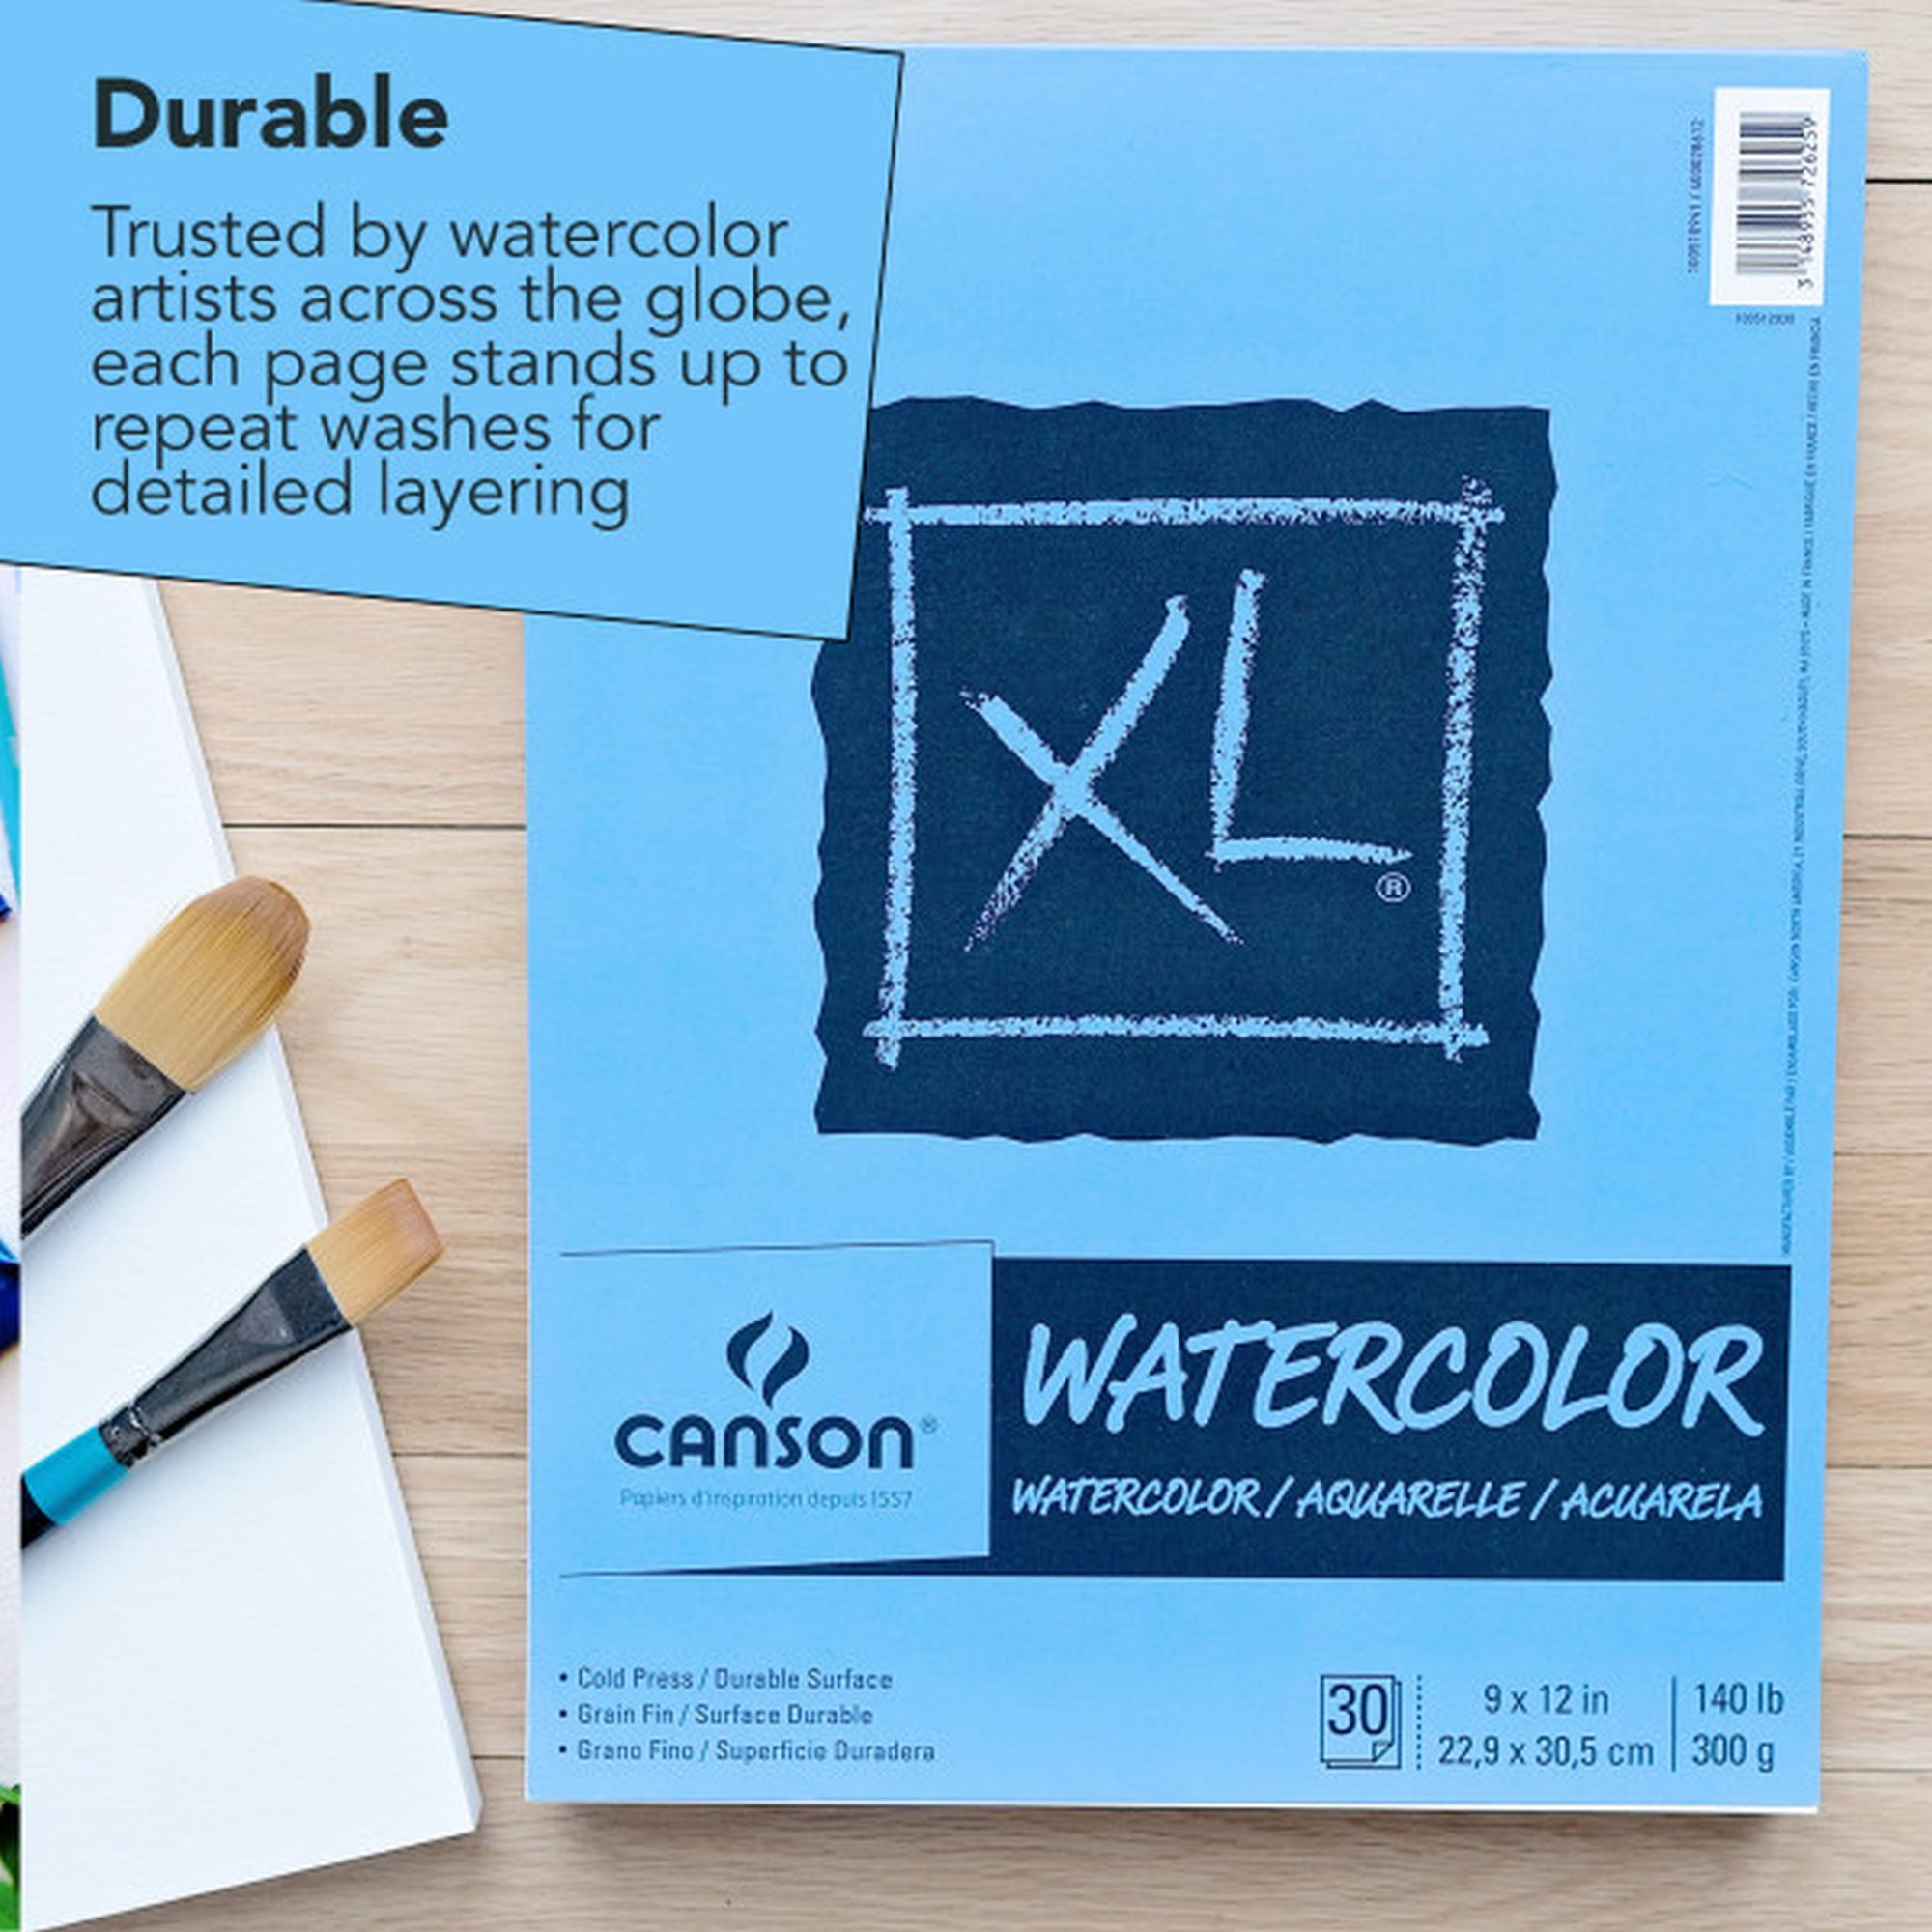 Canson Xl Series Watercolor Textured Paper Pad For Paint, Pencil